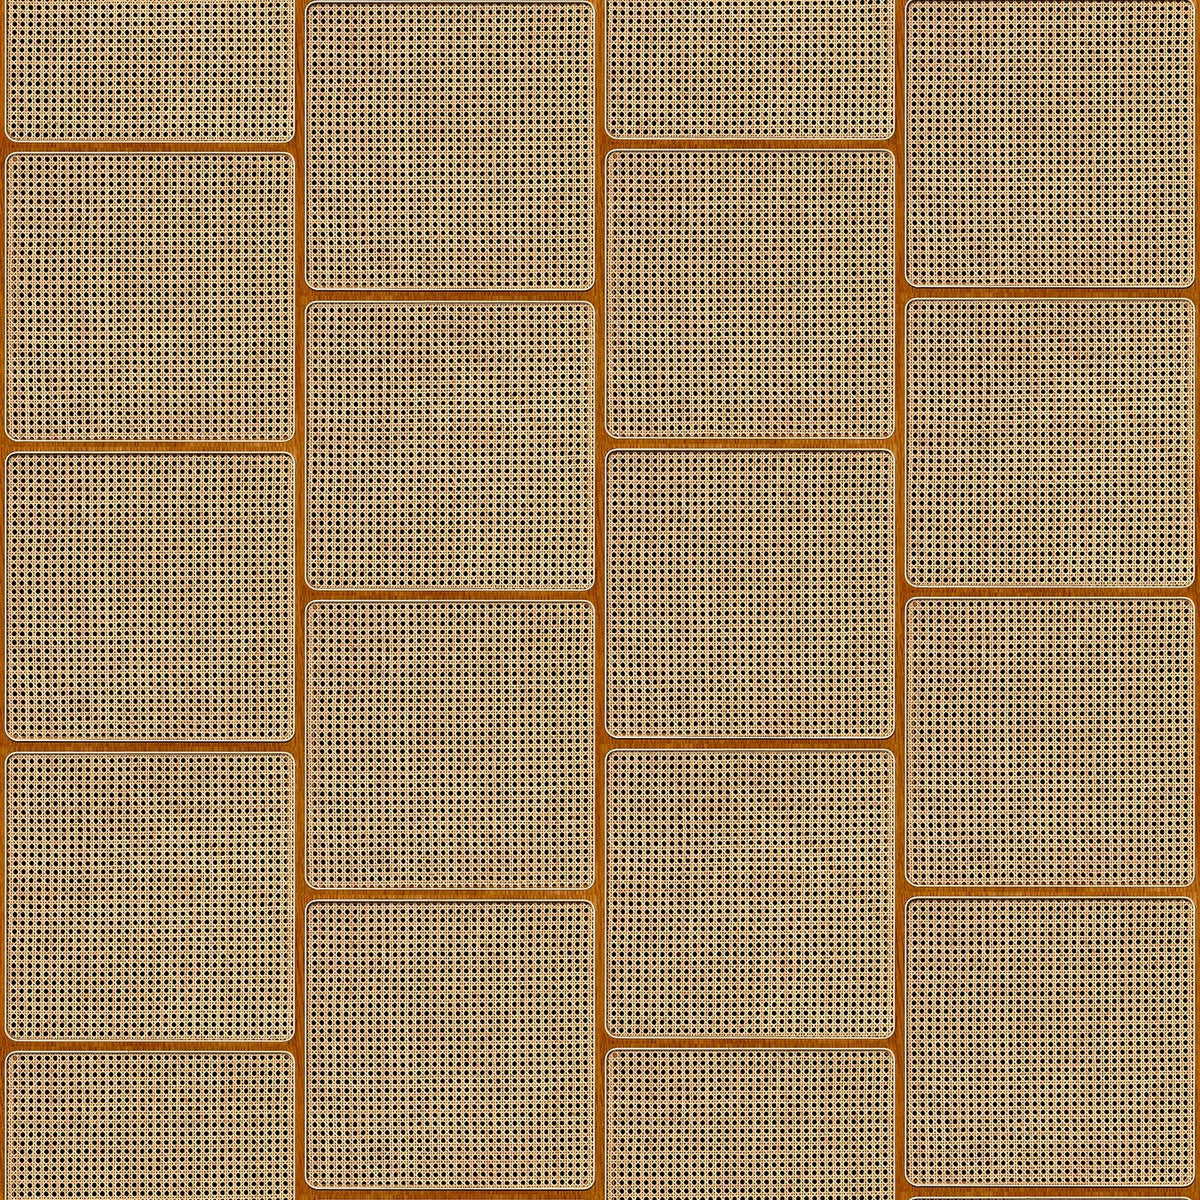 VOS Cane Webbing Square wallpaper by Roderick Vos for NLXL